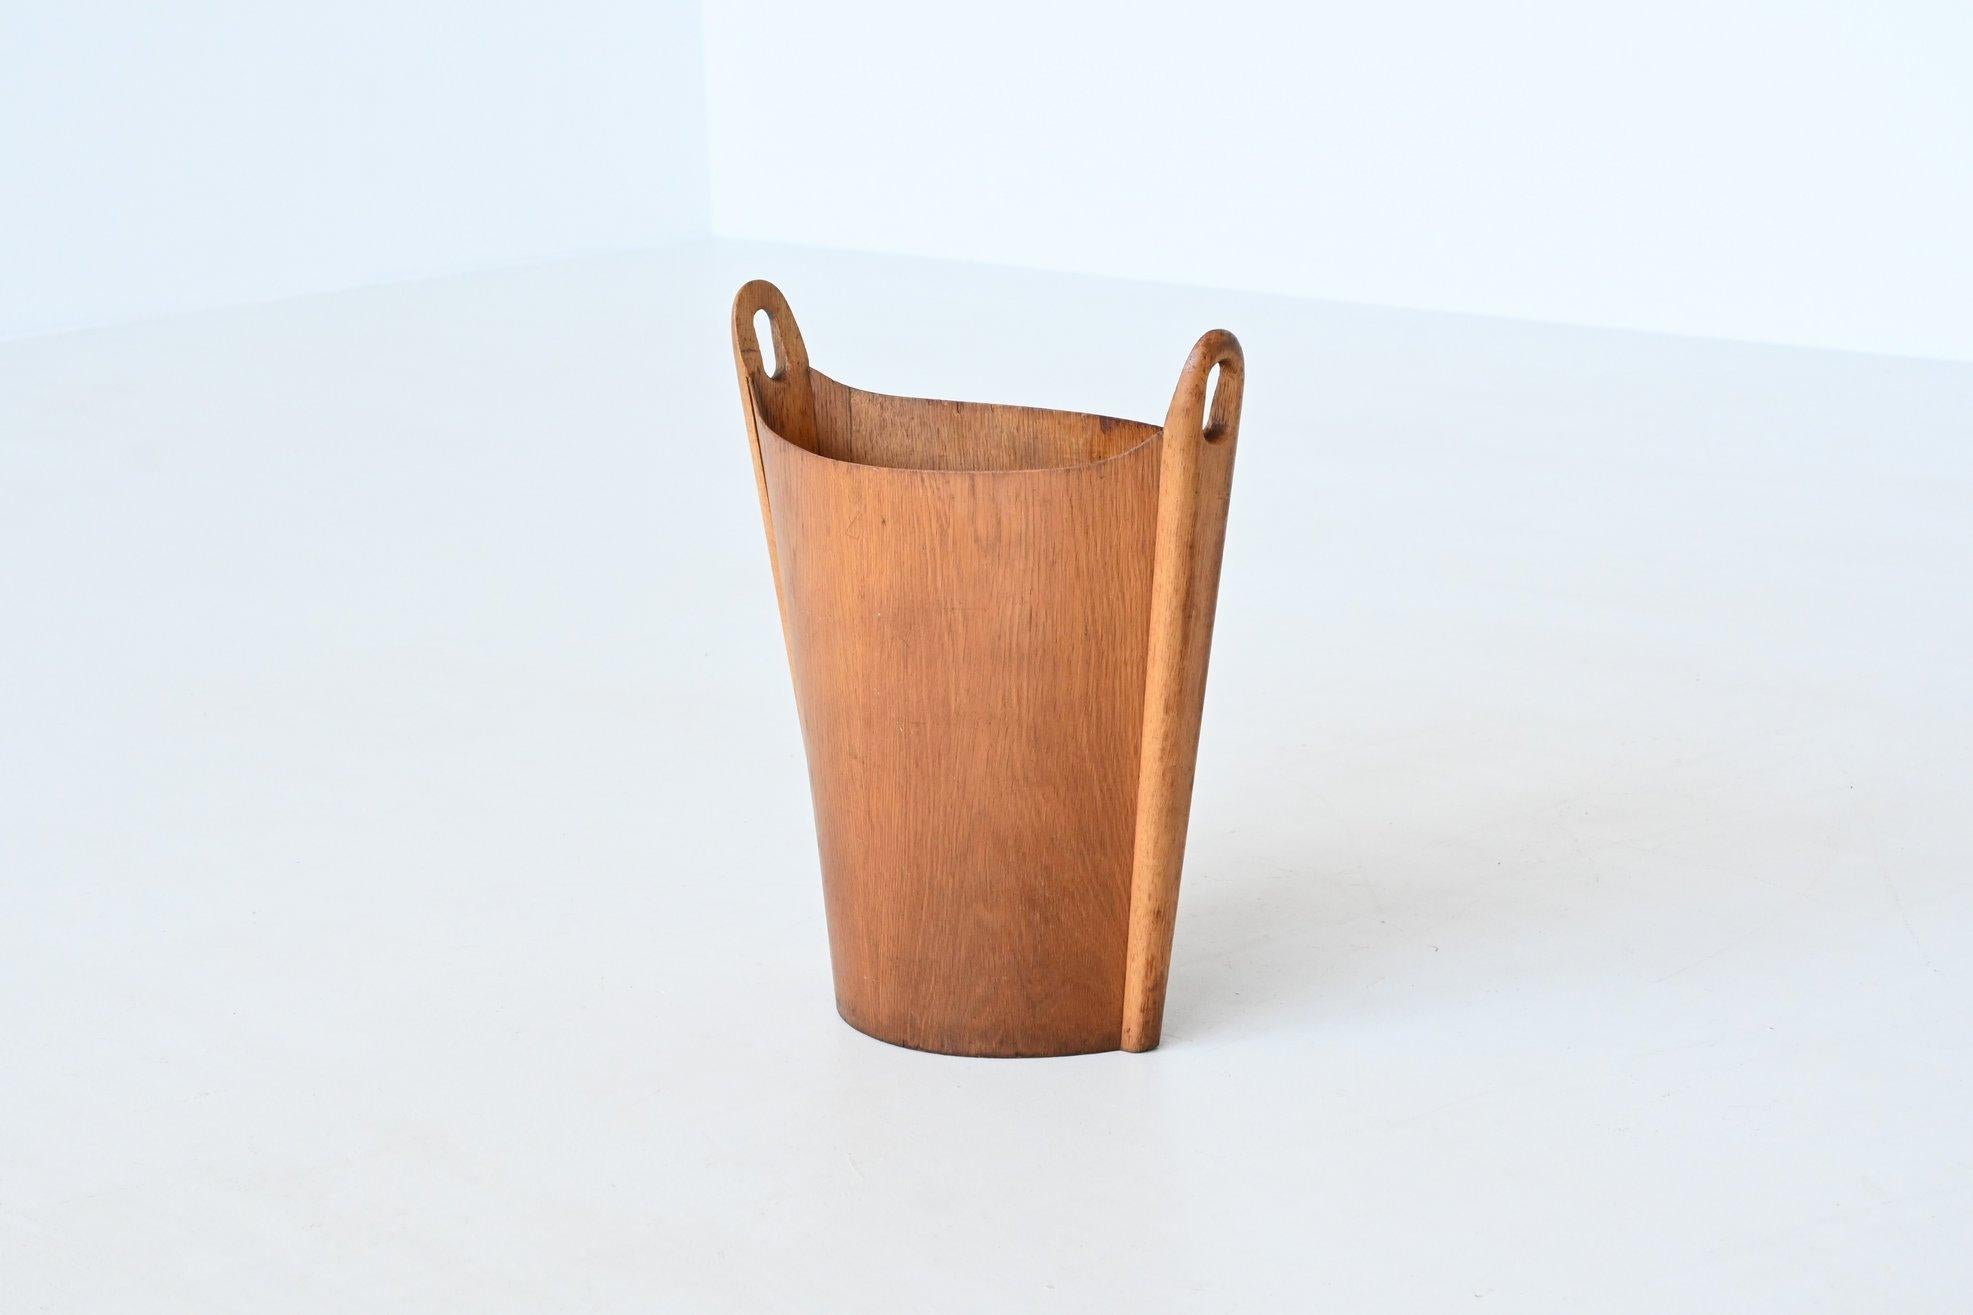 Beautiful elegant shaped waste bin designed by Einar Barnes for P.S. Heggen, Norway 1960. This Danish modern two-tone wastebasket is made of teak and oak wood. The lovely ovoid shape is made of teak plywood sides with solid oak sculptural end pieces